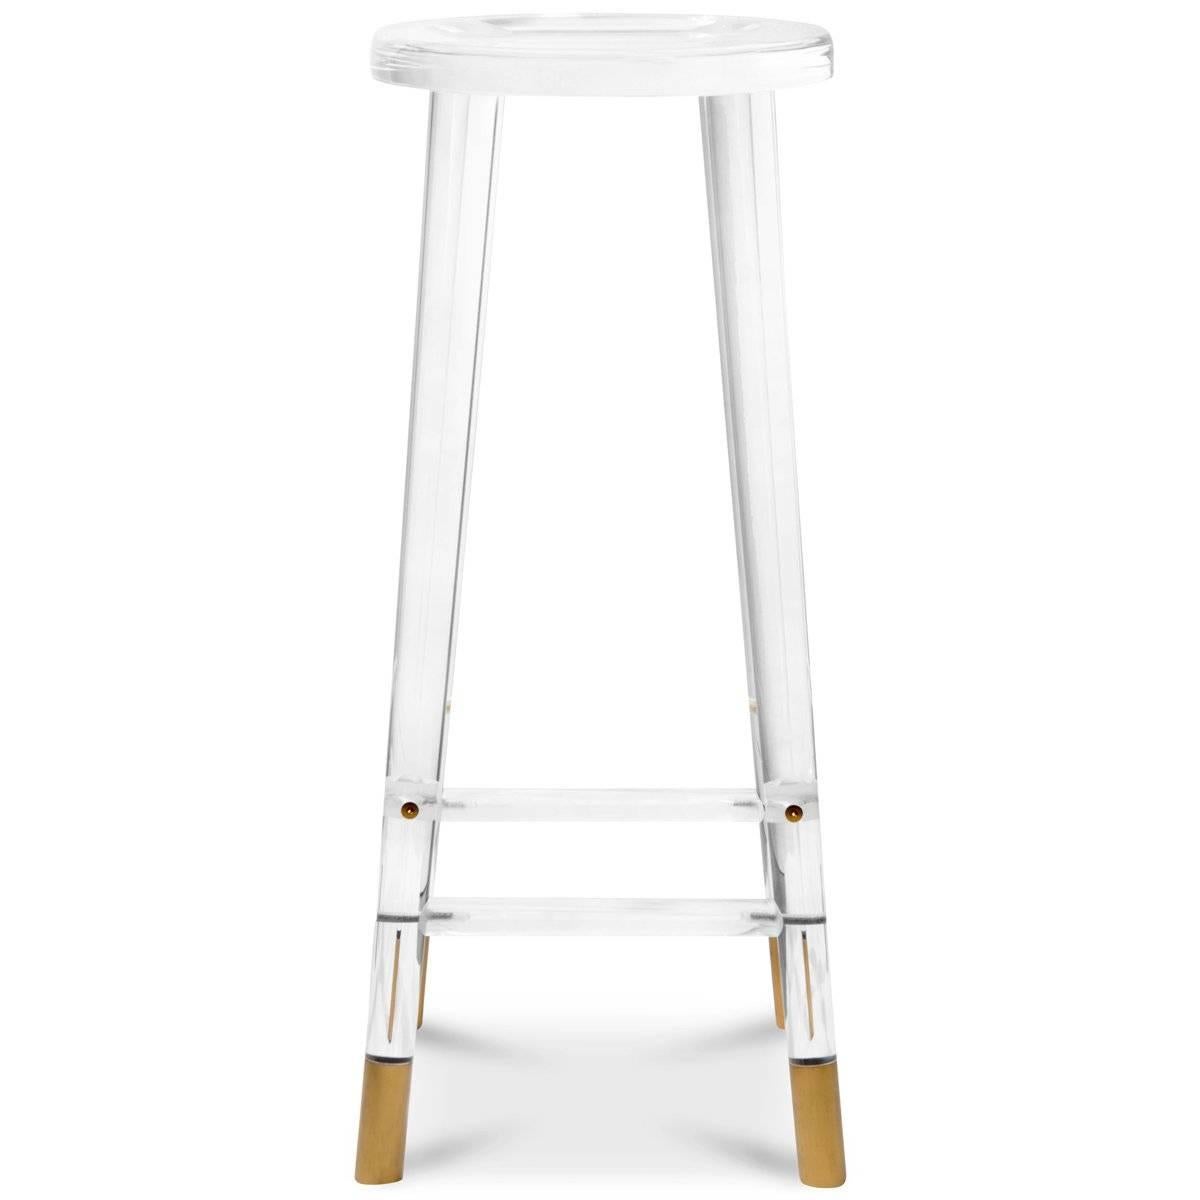 The Helsinki Bar Stool is an unassuming beauty. Featuring a solid lucite body and brass capped legs, the Helsinki Bar Stool is a stylish new take on the classic barstool. Its clear body reflects its surroundings and changes with the light of the